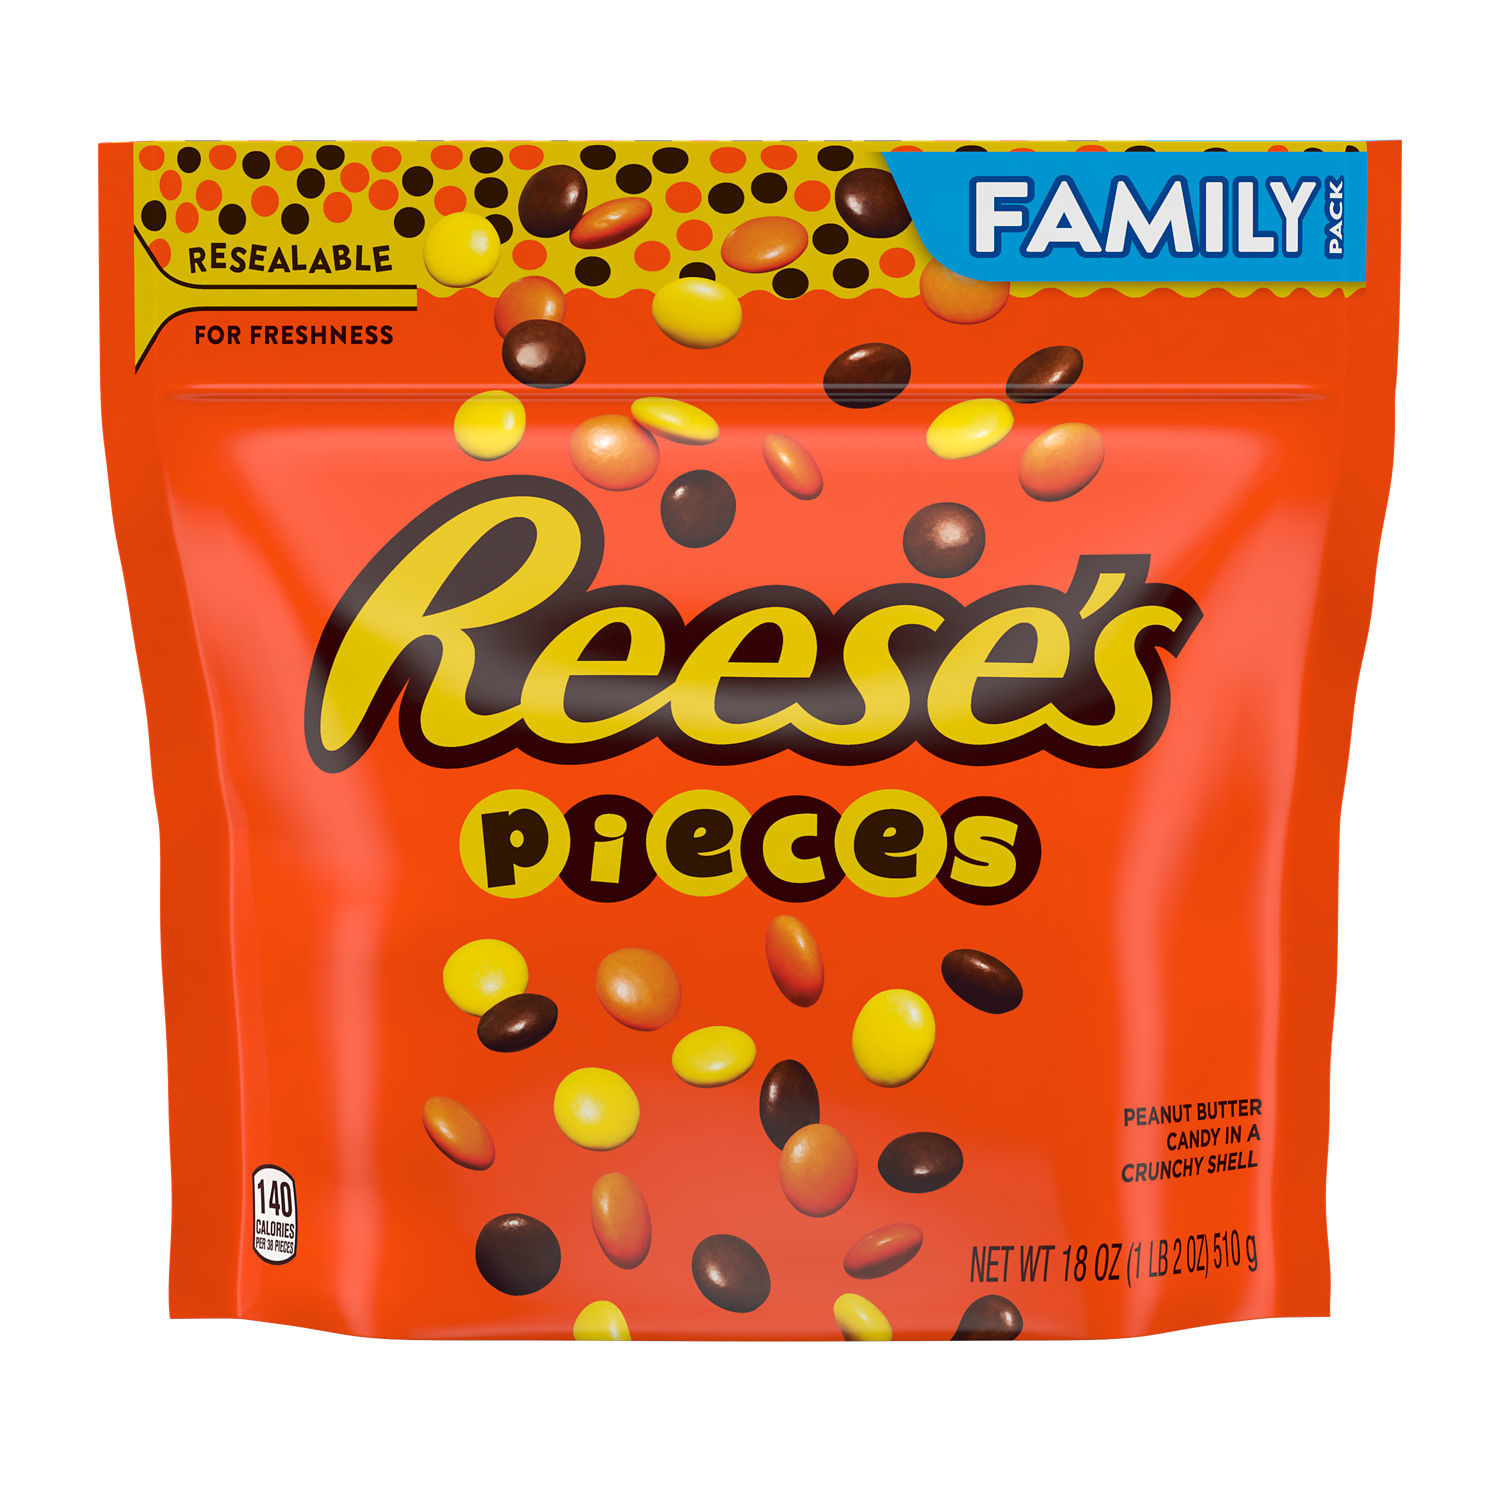 Reese's Pieces Peanut Butter Candy, Family Pack 18 oz - image 1 of 8